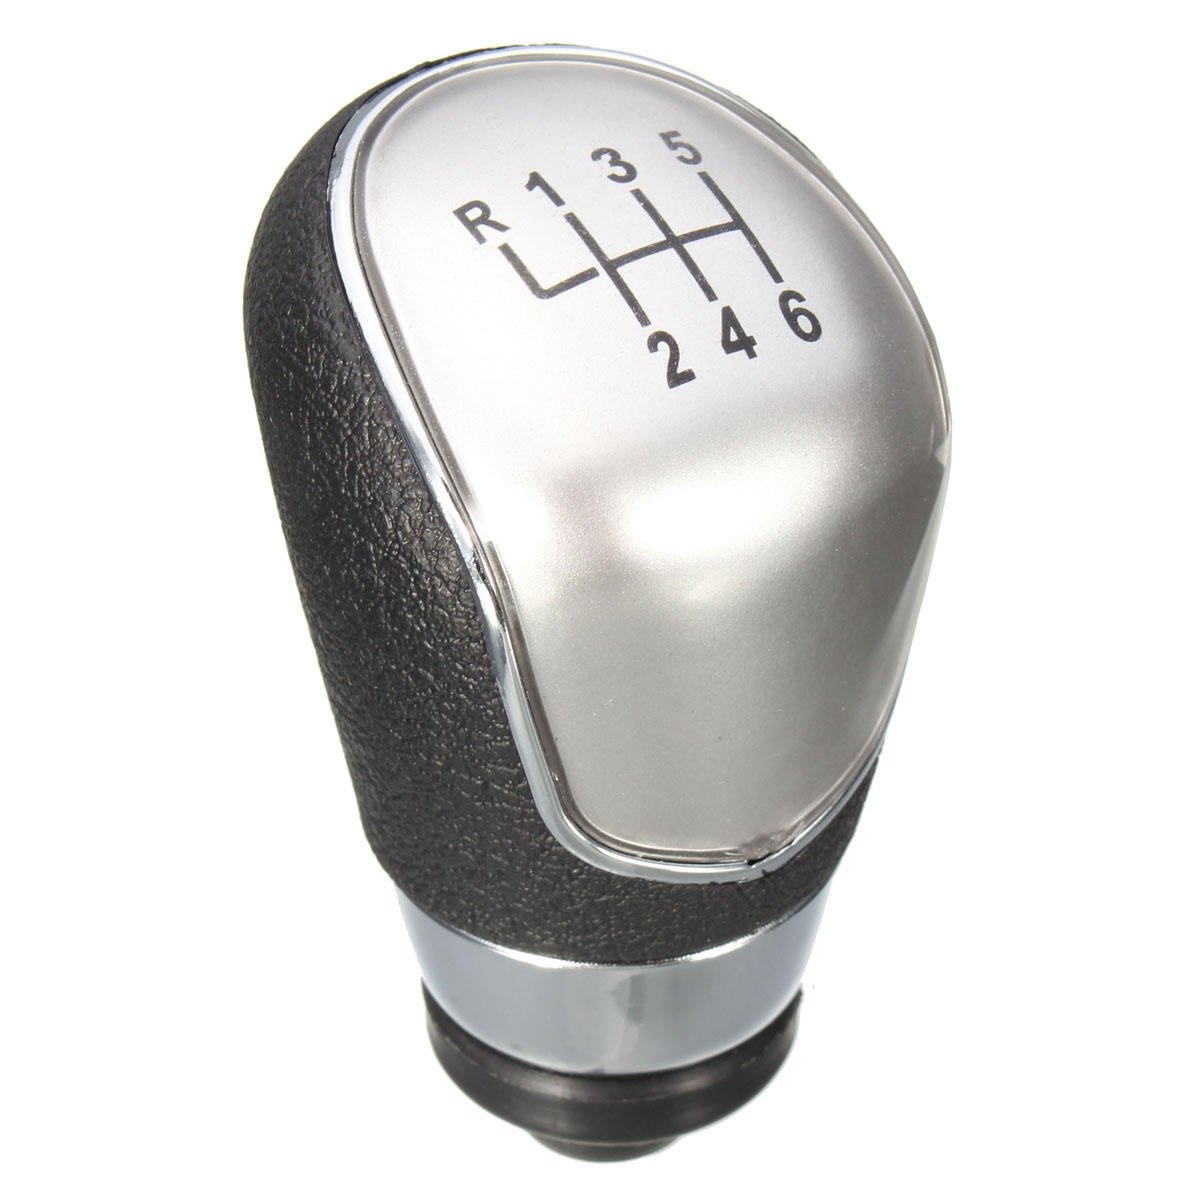 6 Speed Gear Shift Knob For Ford Focus MK3 Fiesta MK7 C-max Mondeo Transit Connect